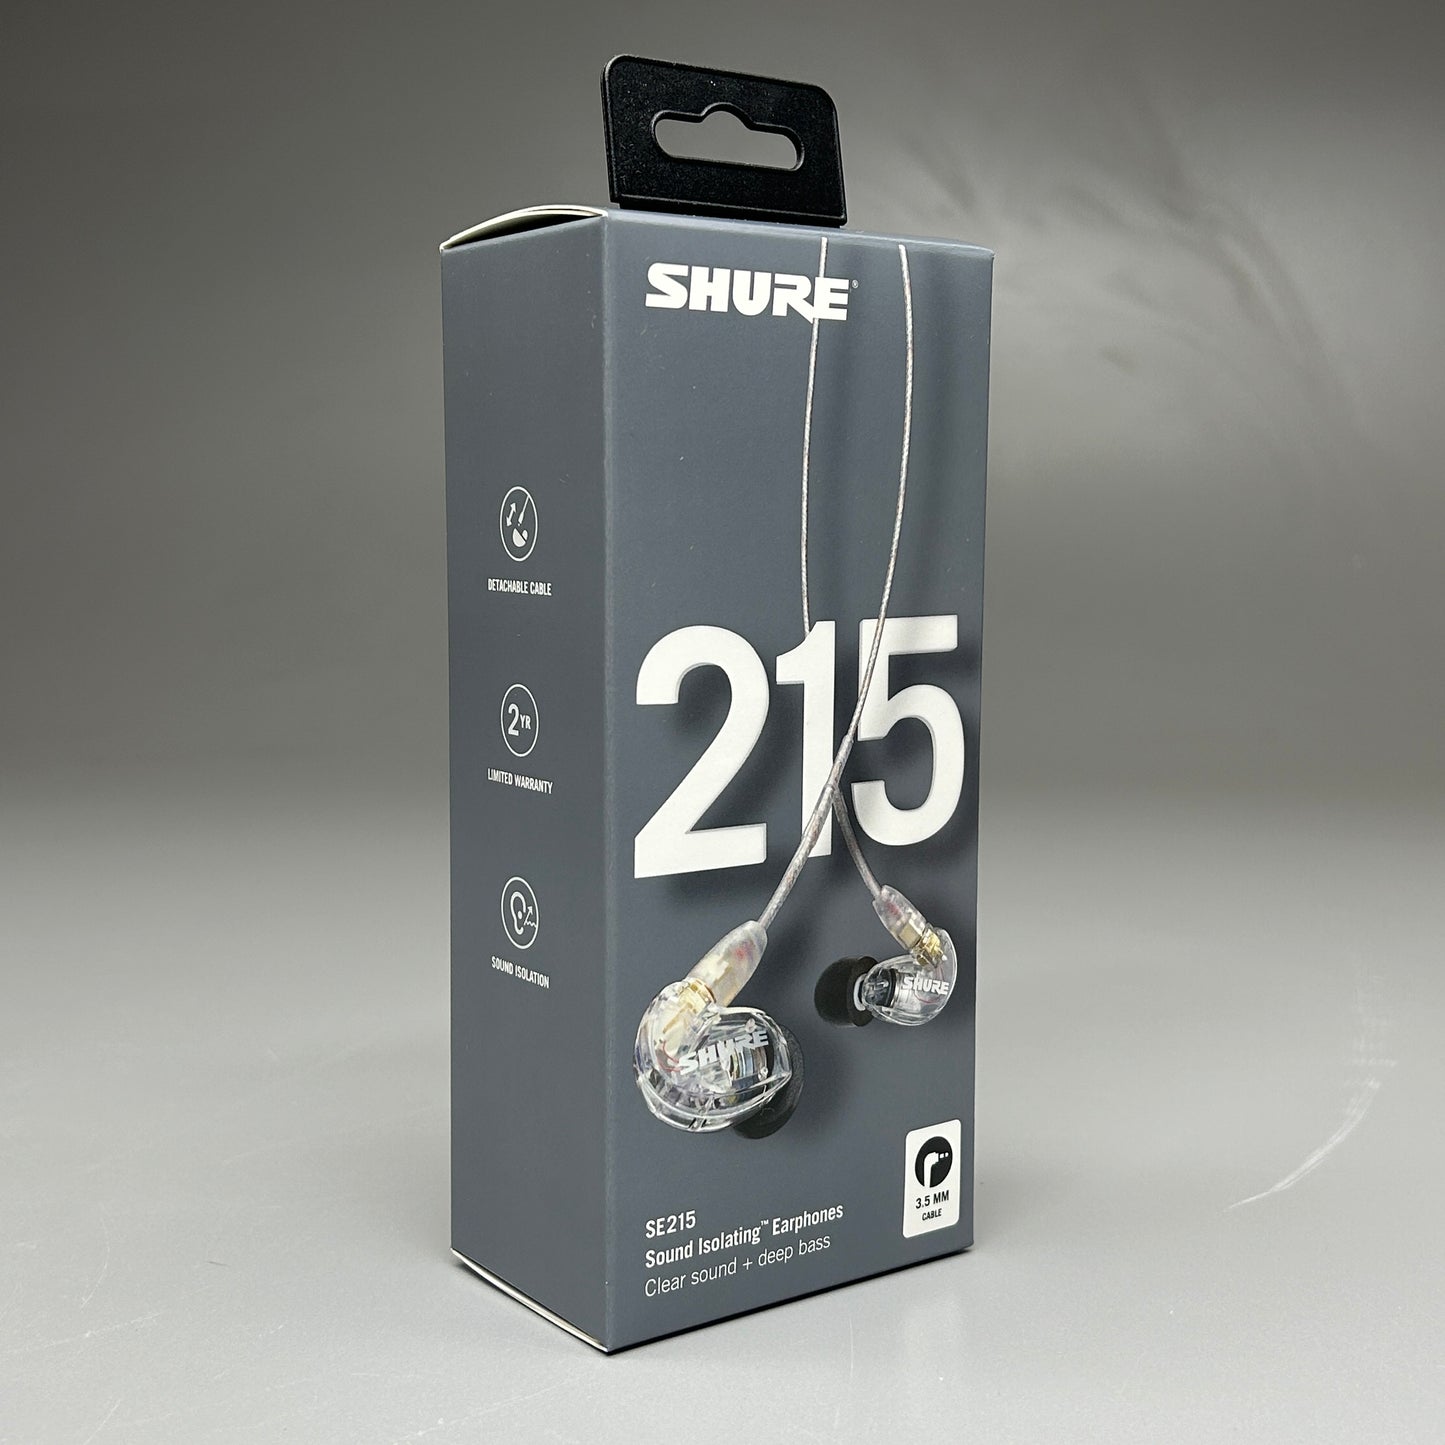 SHURE Professional Sound Isolating Earphones 64" Cable Length SE215 Clear (New)